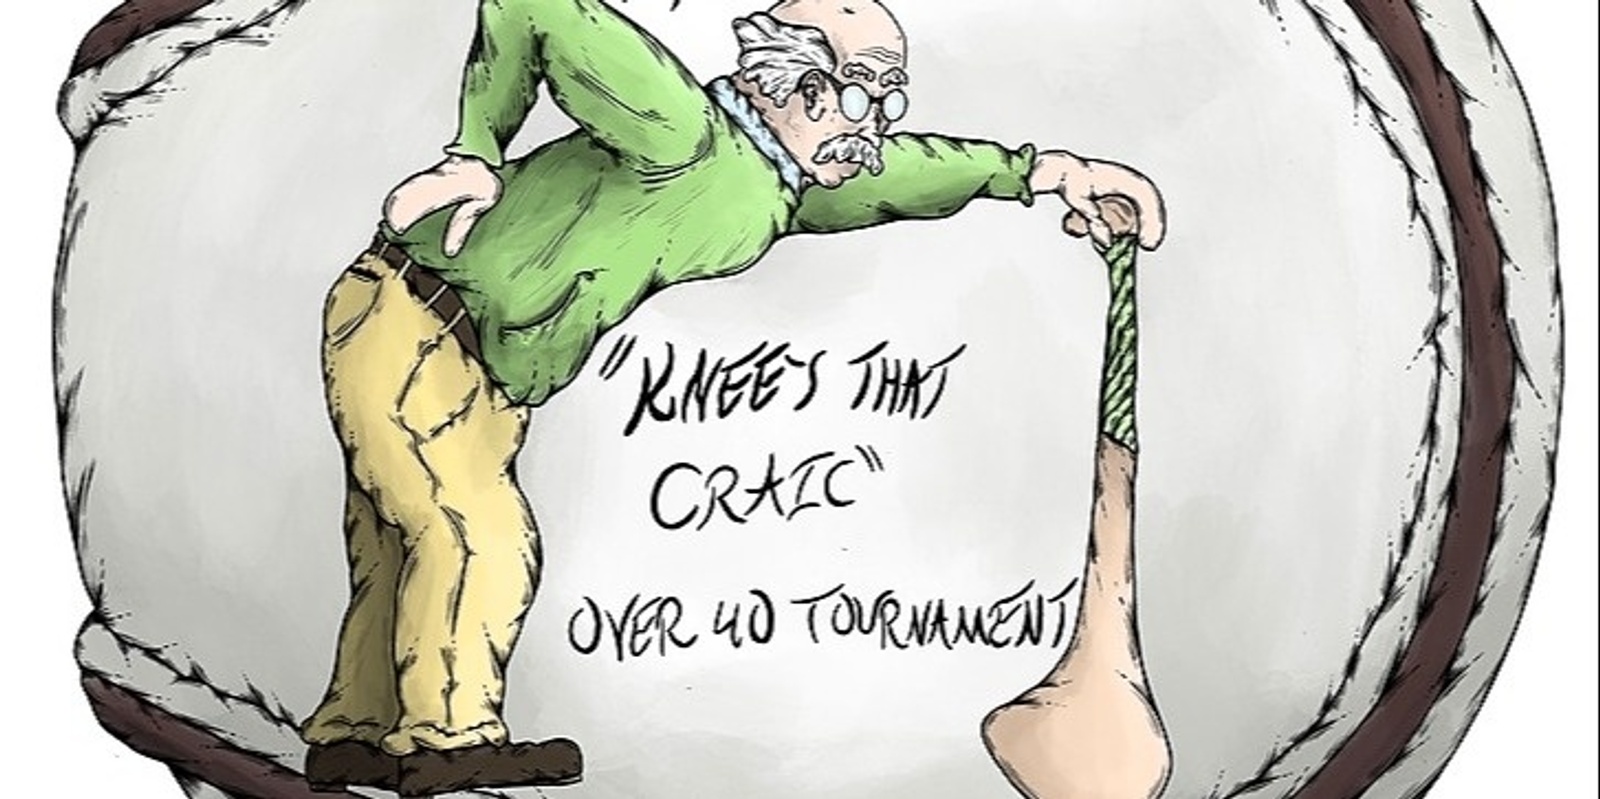 Banner image for NCGAA  "Knees that Craic" Tournament